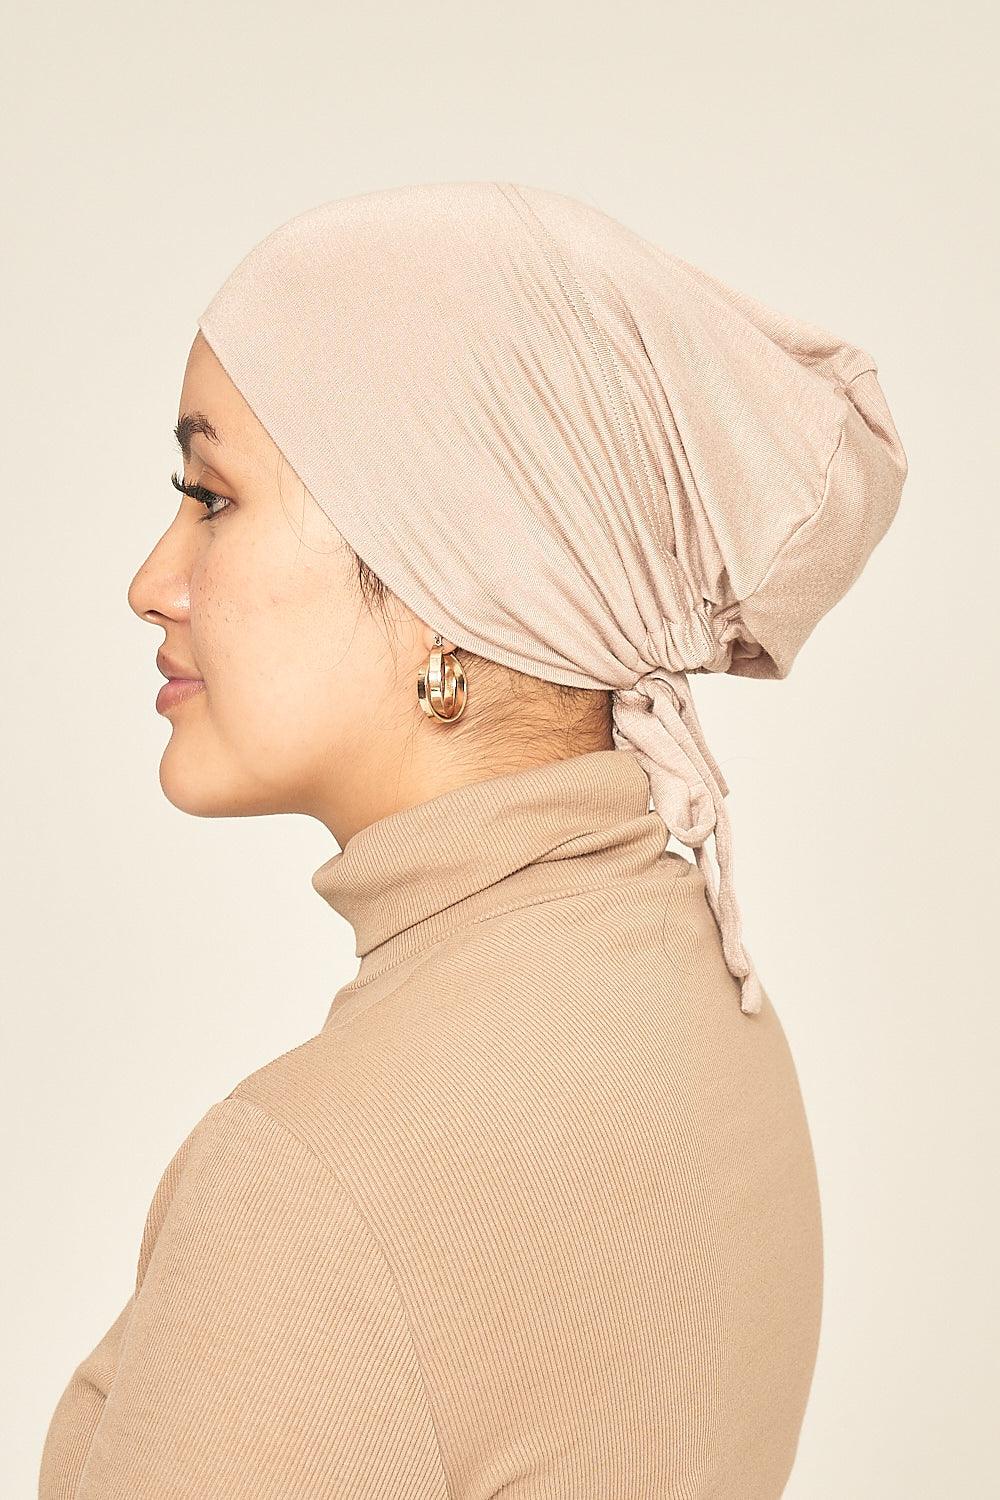 Tie Back Cotton Jersey Under Scarf | Oatmeal - Sabaah's Boutique